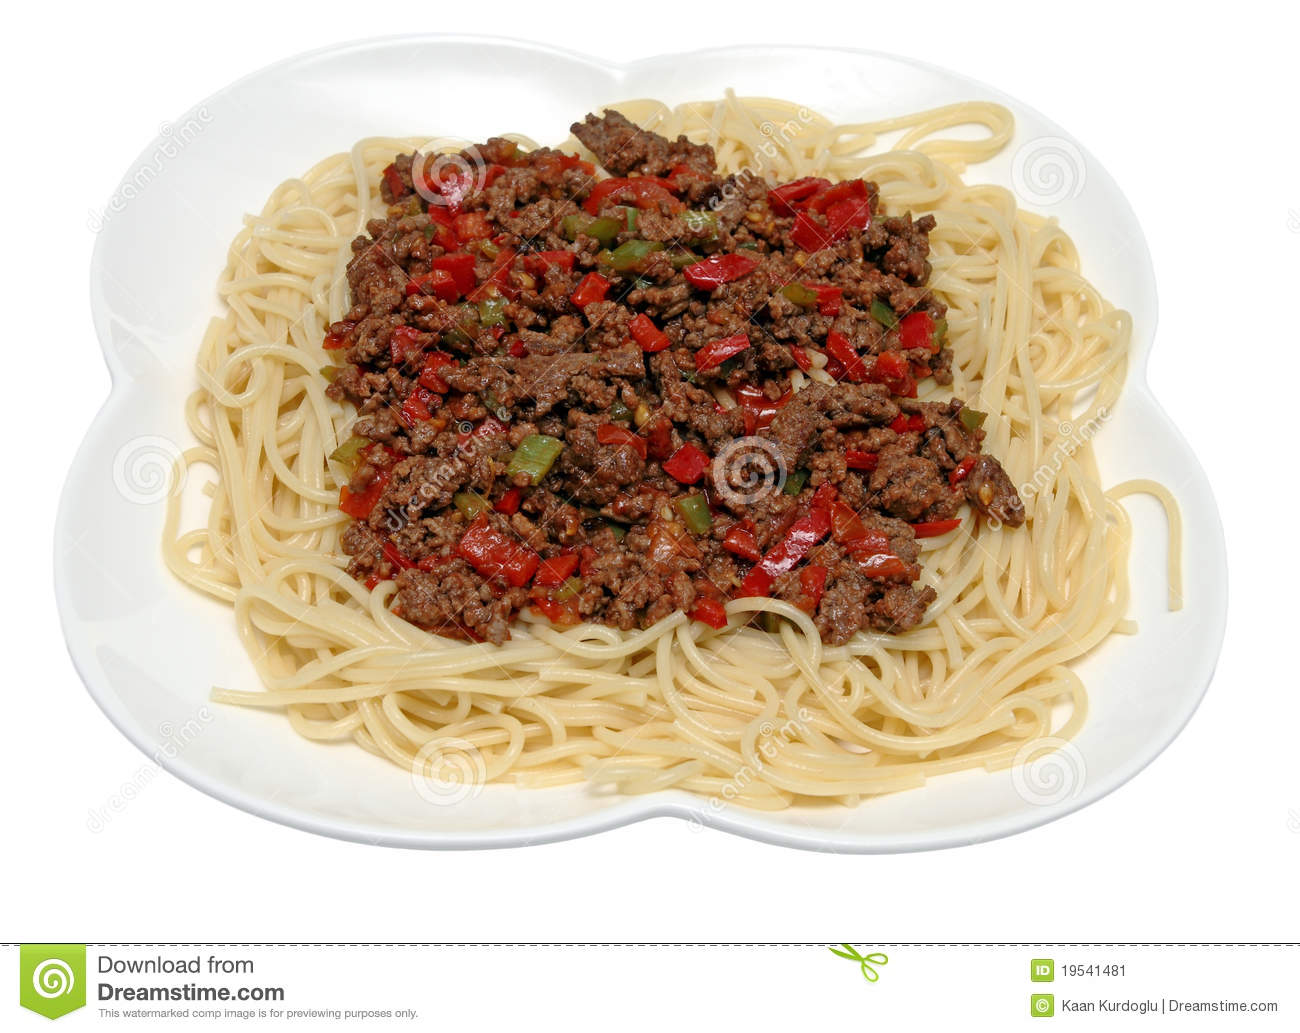 Spaghetti With Minced Meat Sauce Stock Image   Image  19541481